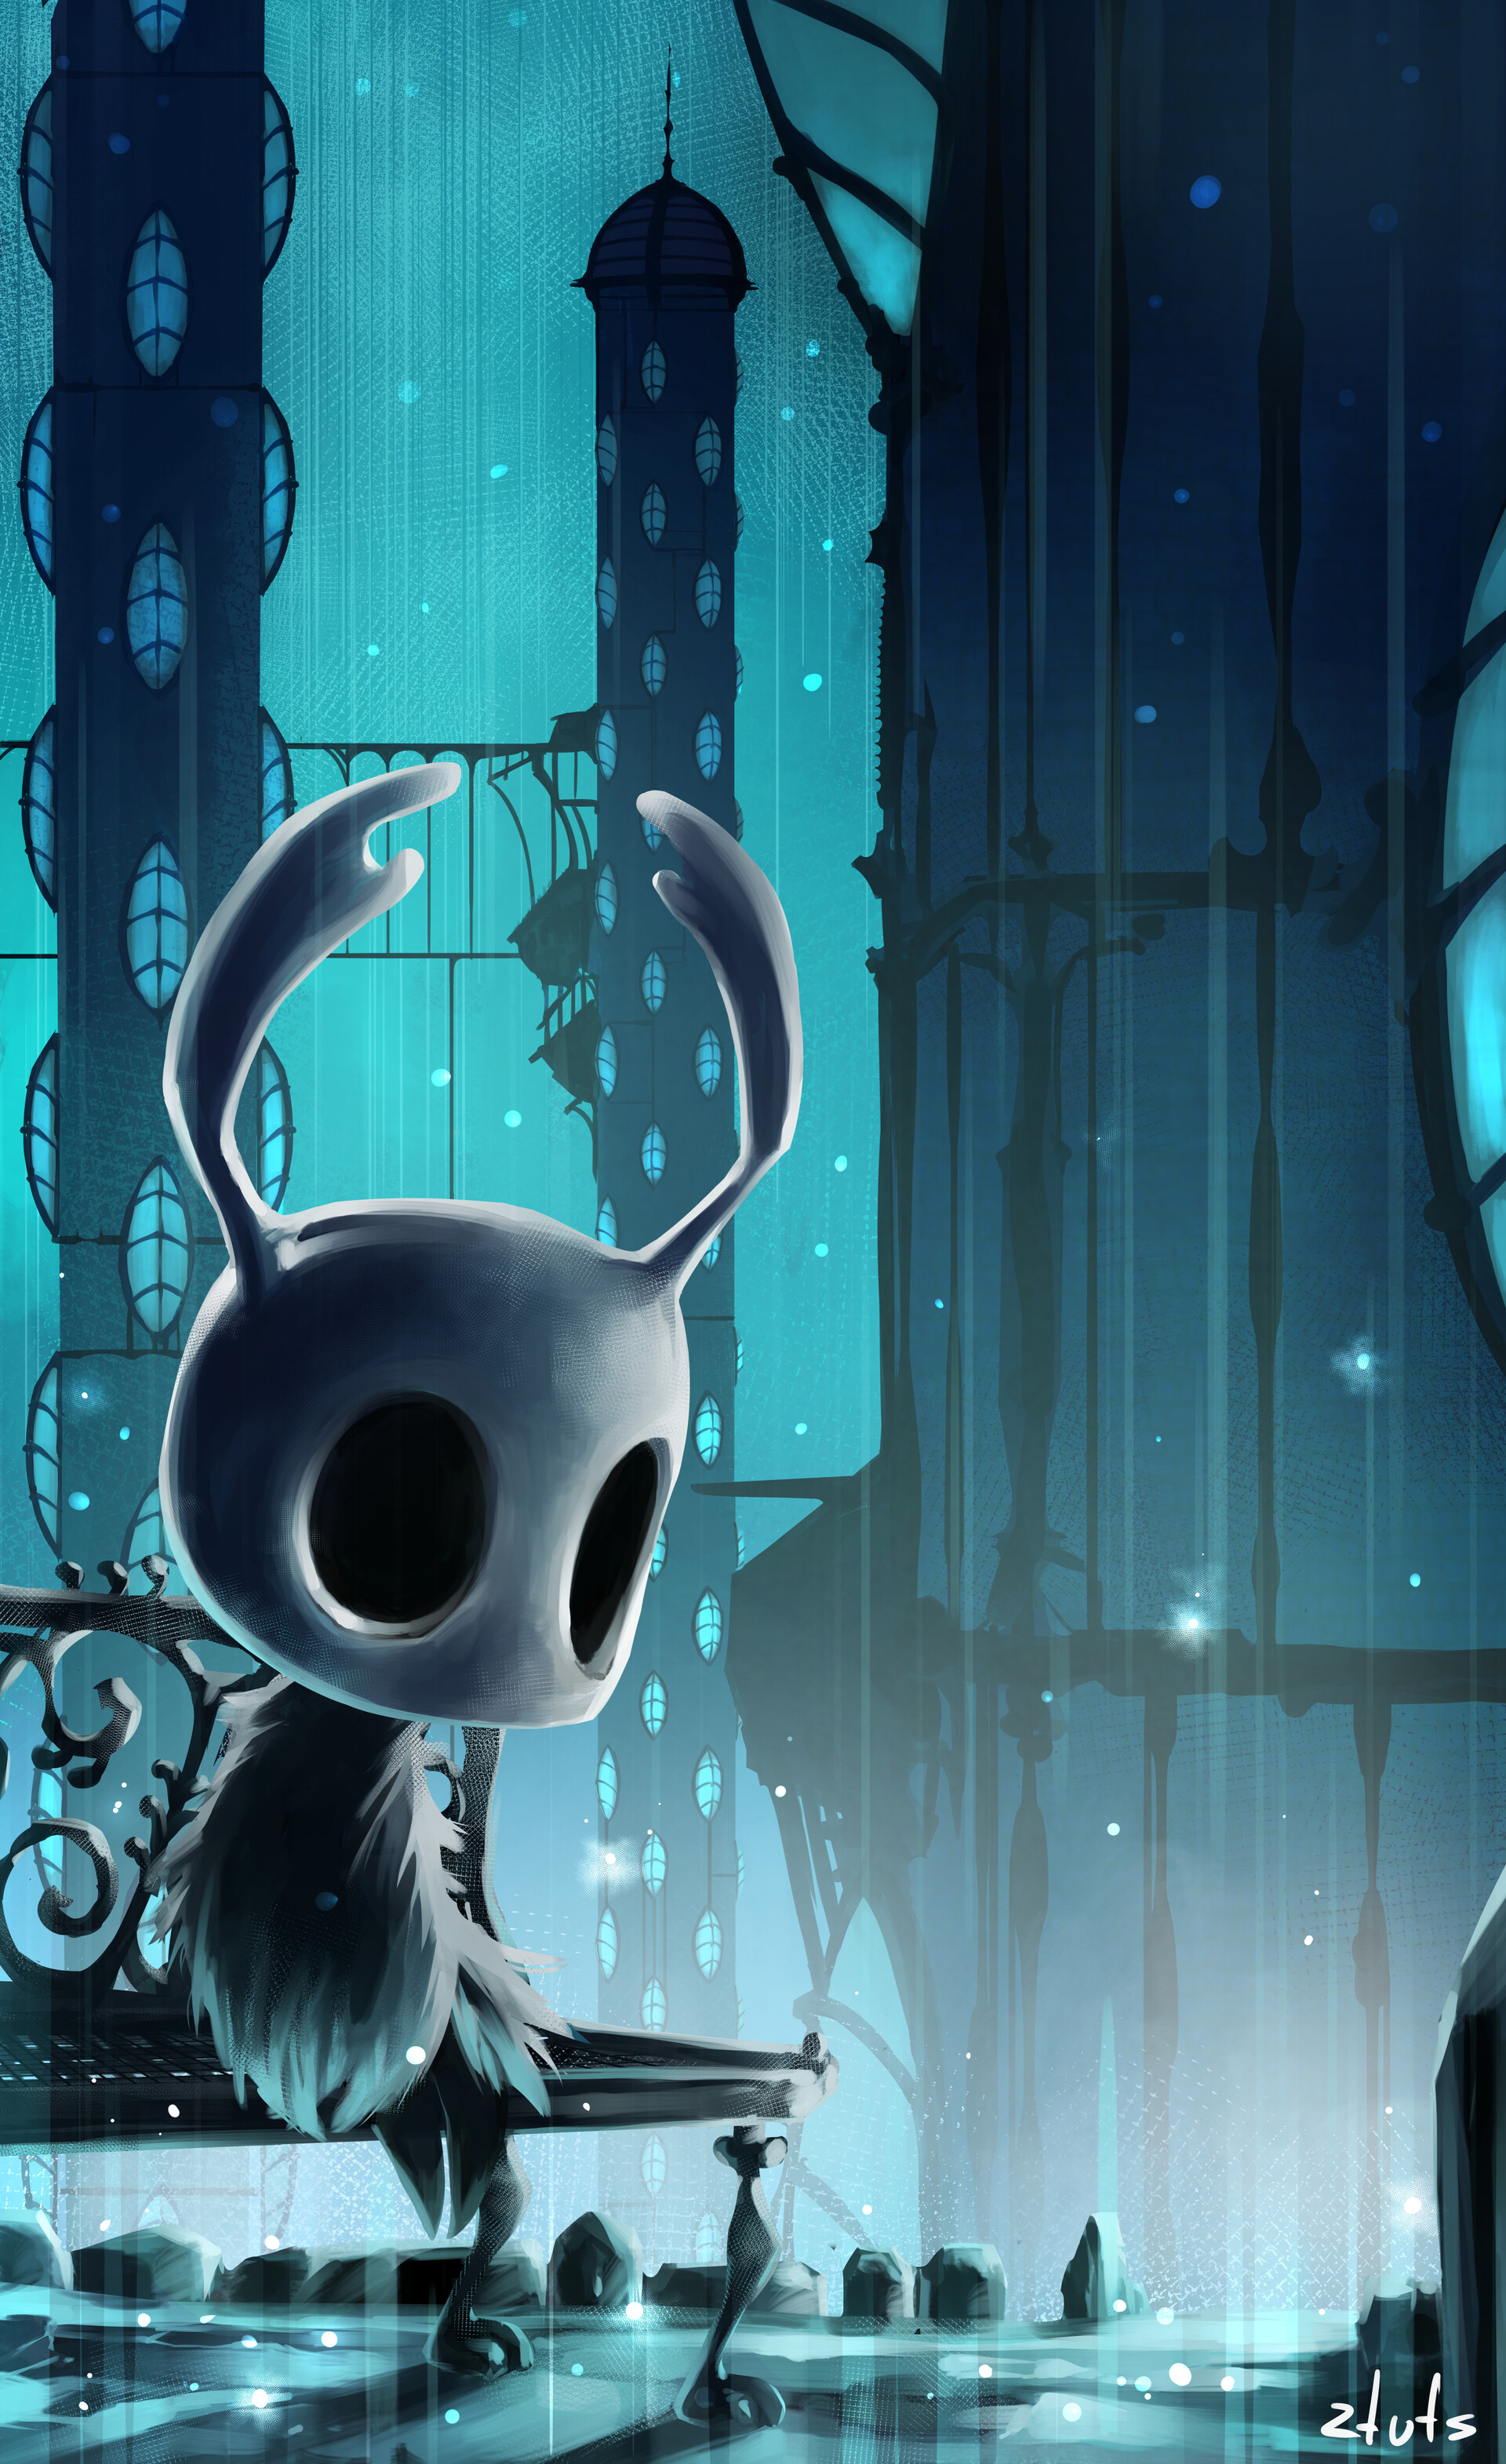 Here's some Hollow Knight fanart for yall! 